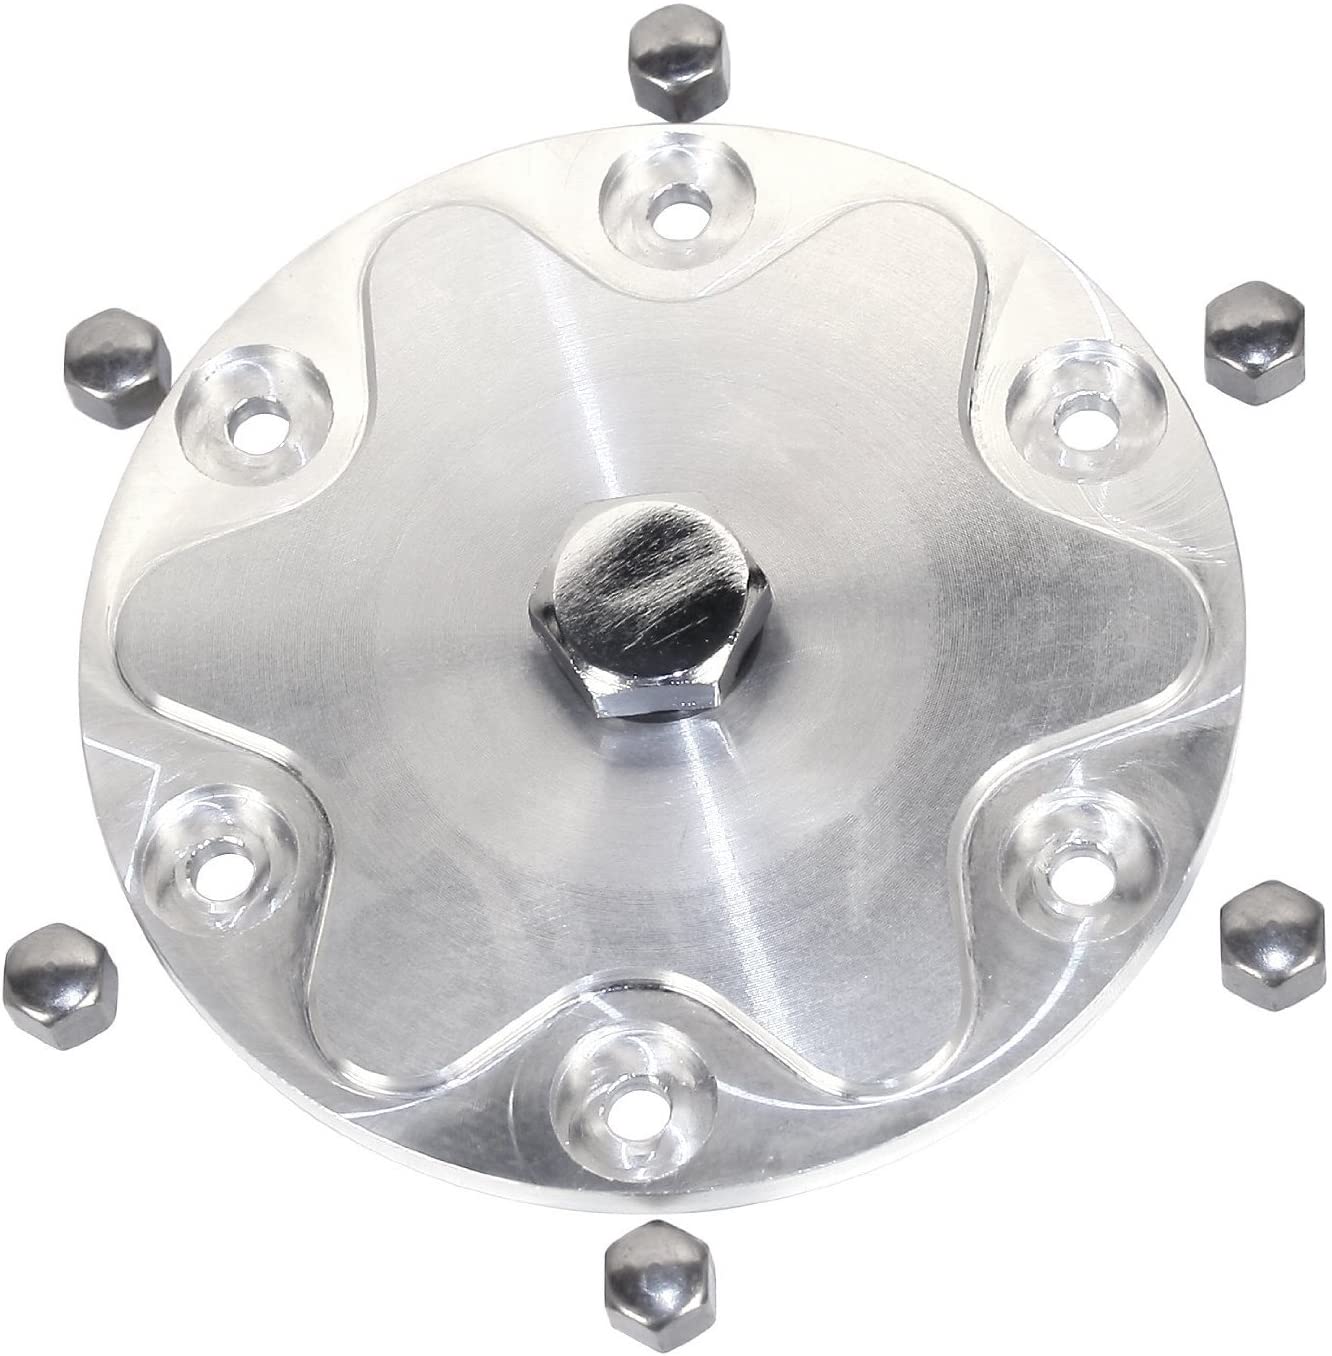 Billet Aluminum Oil Sump Drain Plate, With Plug, Compatible with Dune Buggy